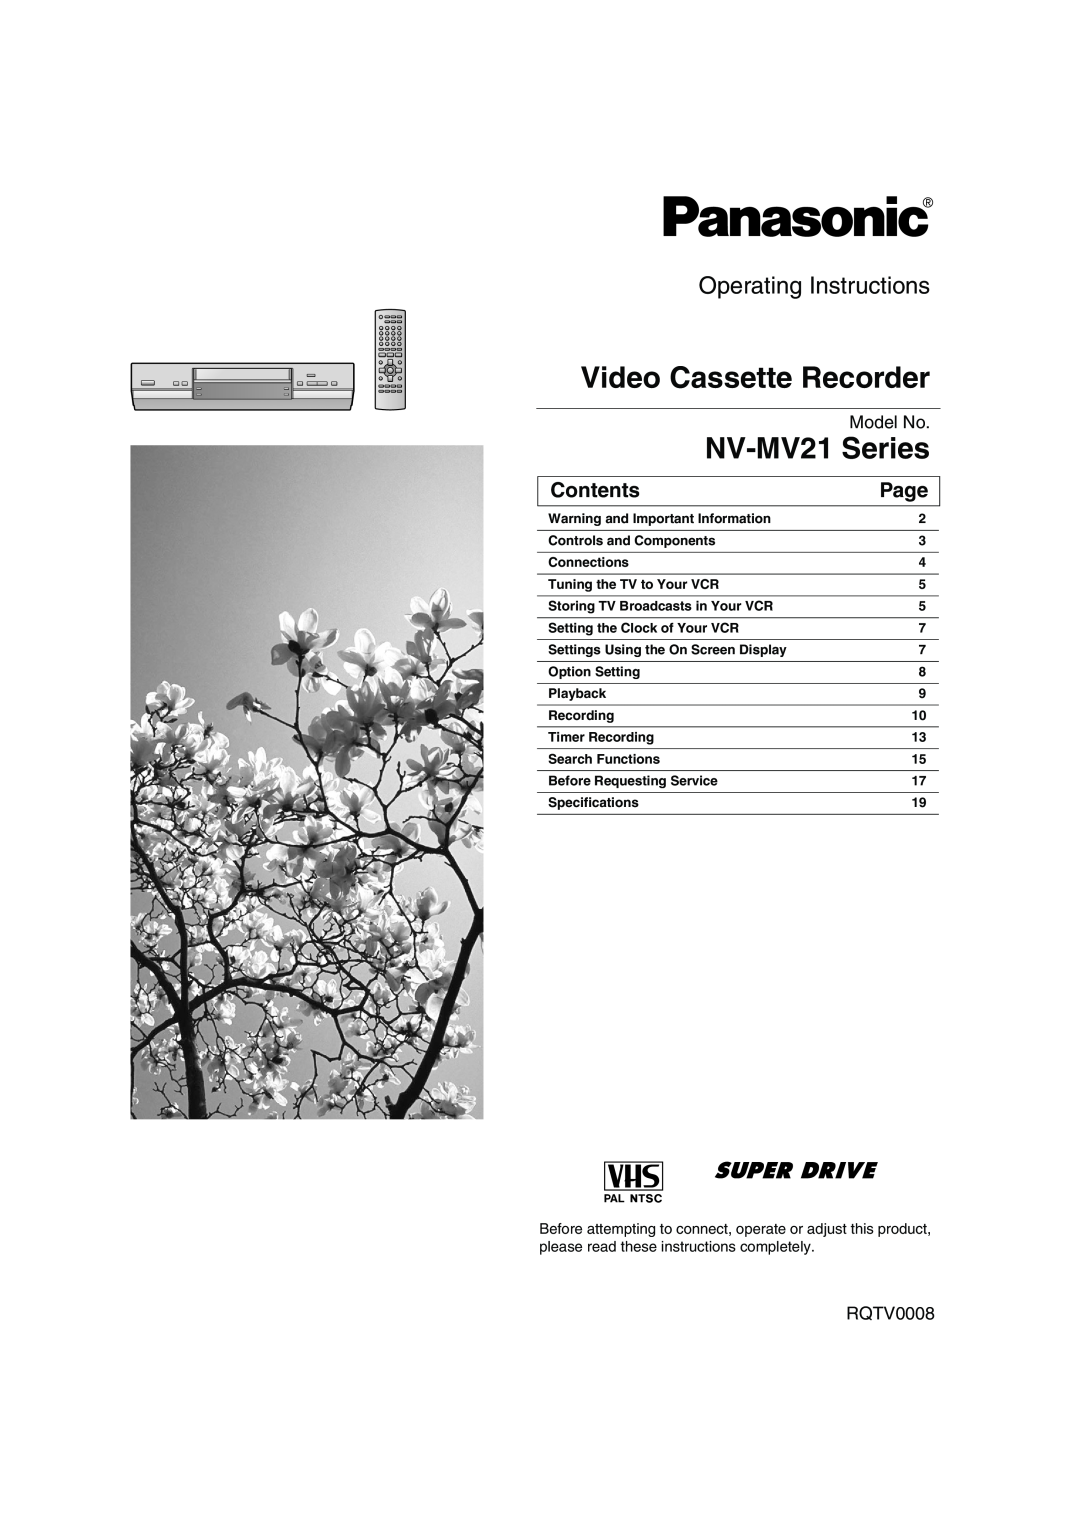 Panasonic NV-MV21 Series specifications Contents, Page, Video Cassette Recorder, Operating Instructions, Model No 